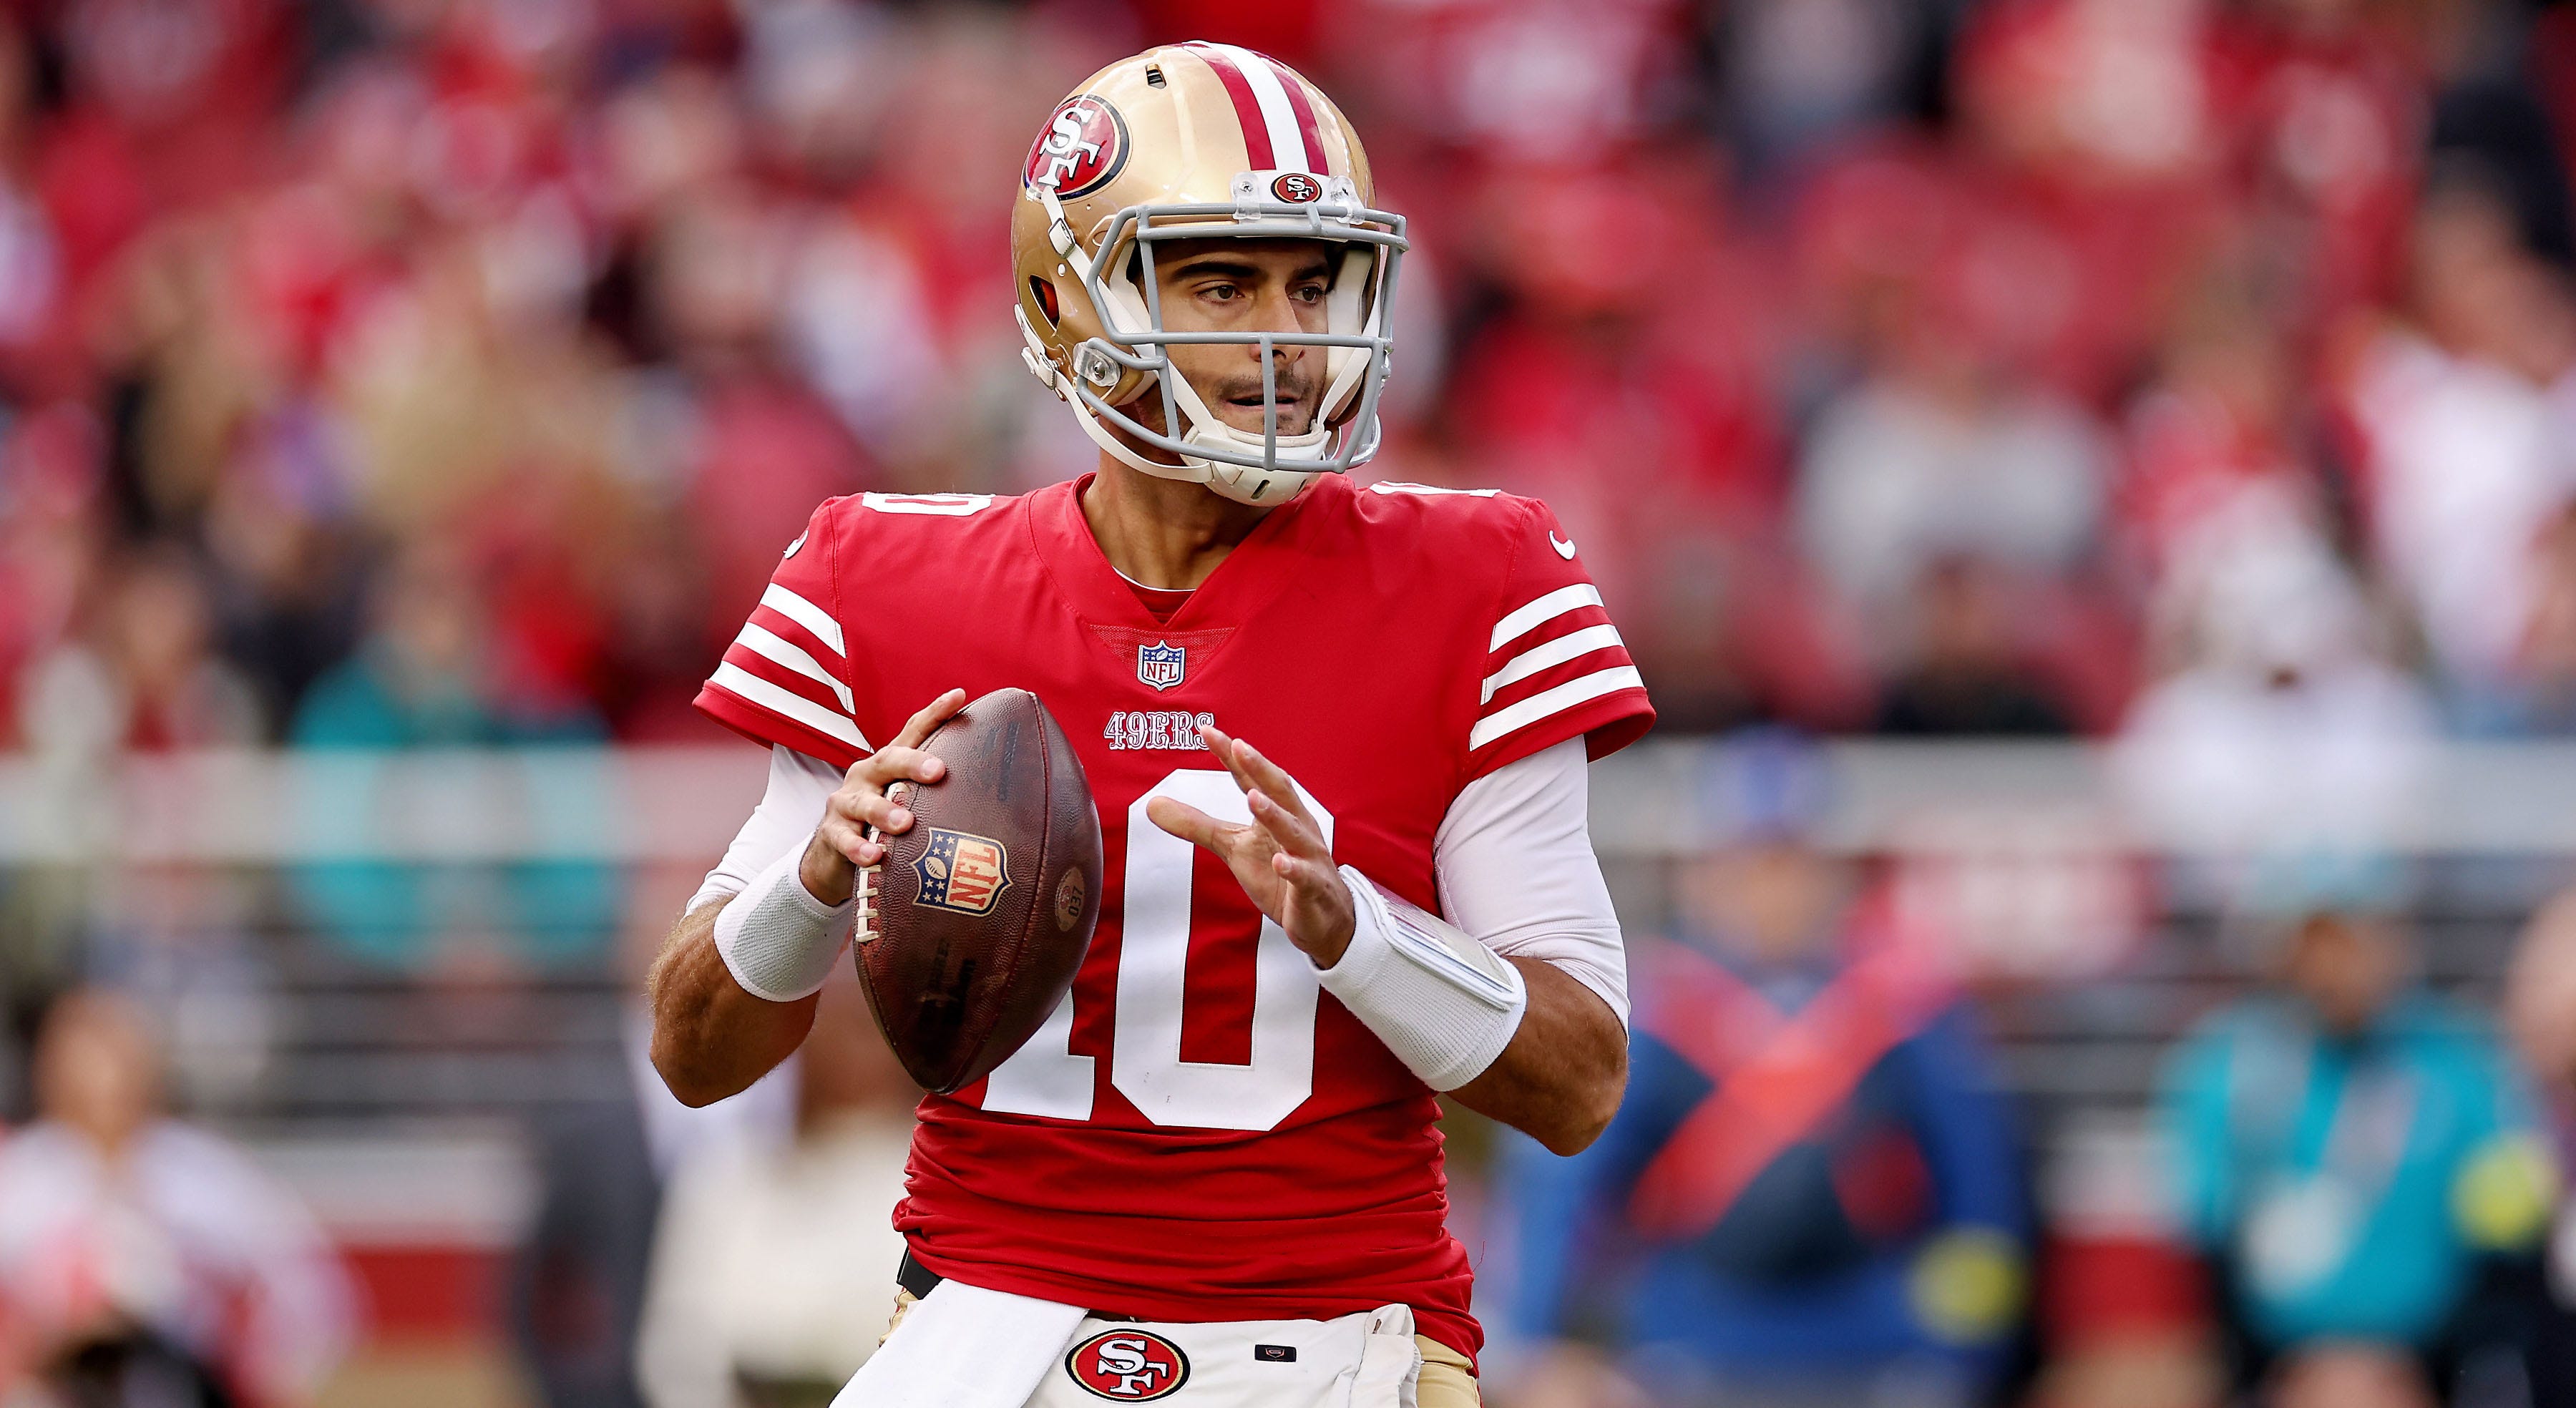 49ers' Jimmy Garoppolo out for season after suffering foot injury vs. Dolphins | Fox News